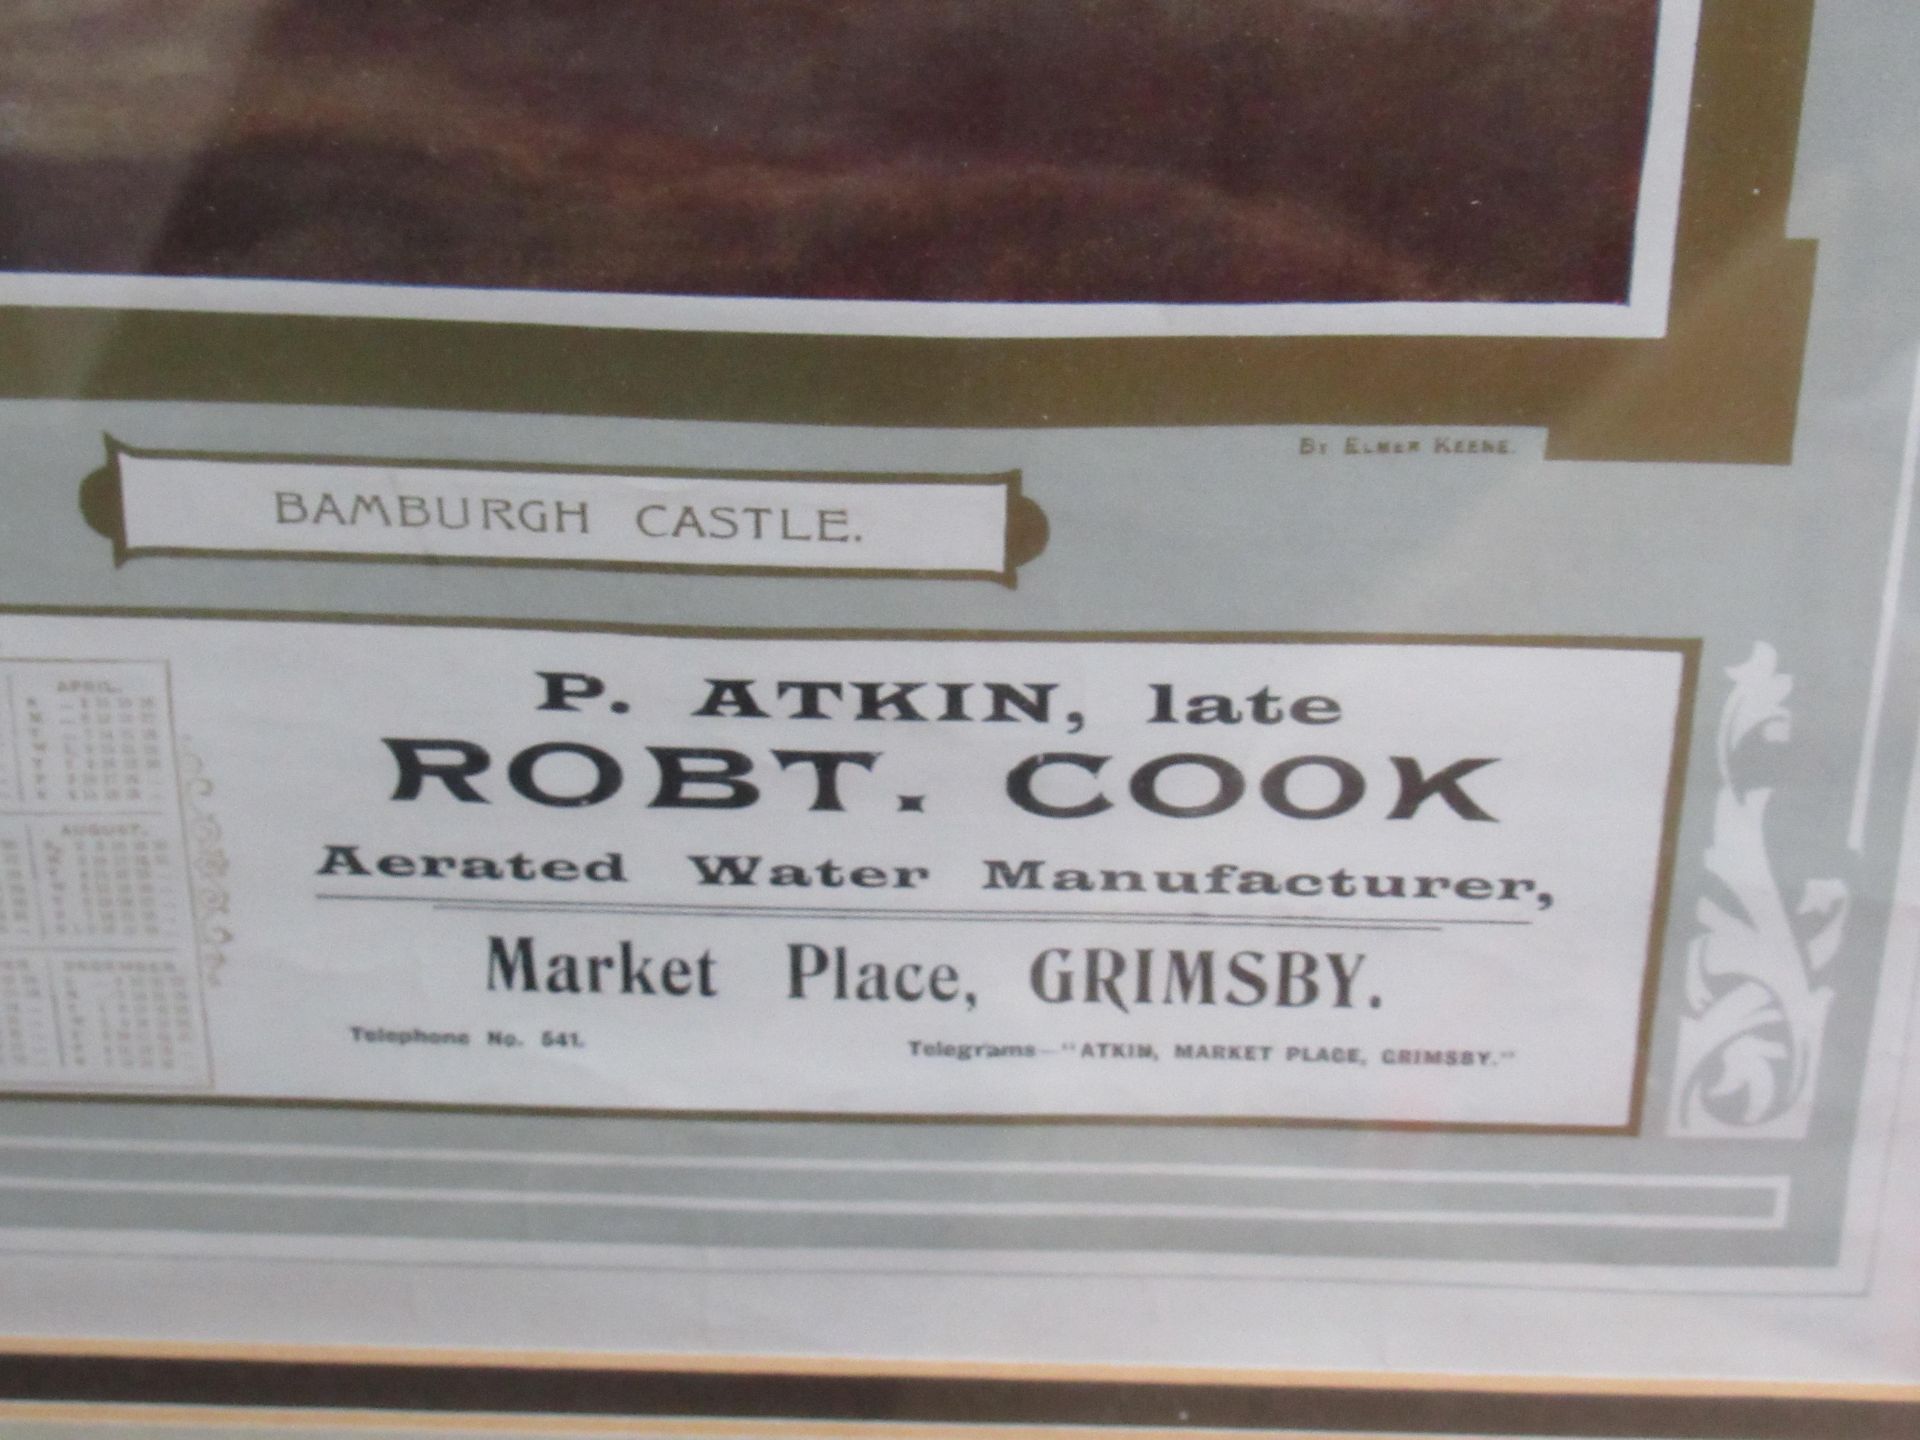 2x P. Atkin late Robt. Cook aerated water manufacturer 1908 calendars titles "Bamburgh Castle" and - Image 10 of 11